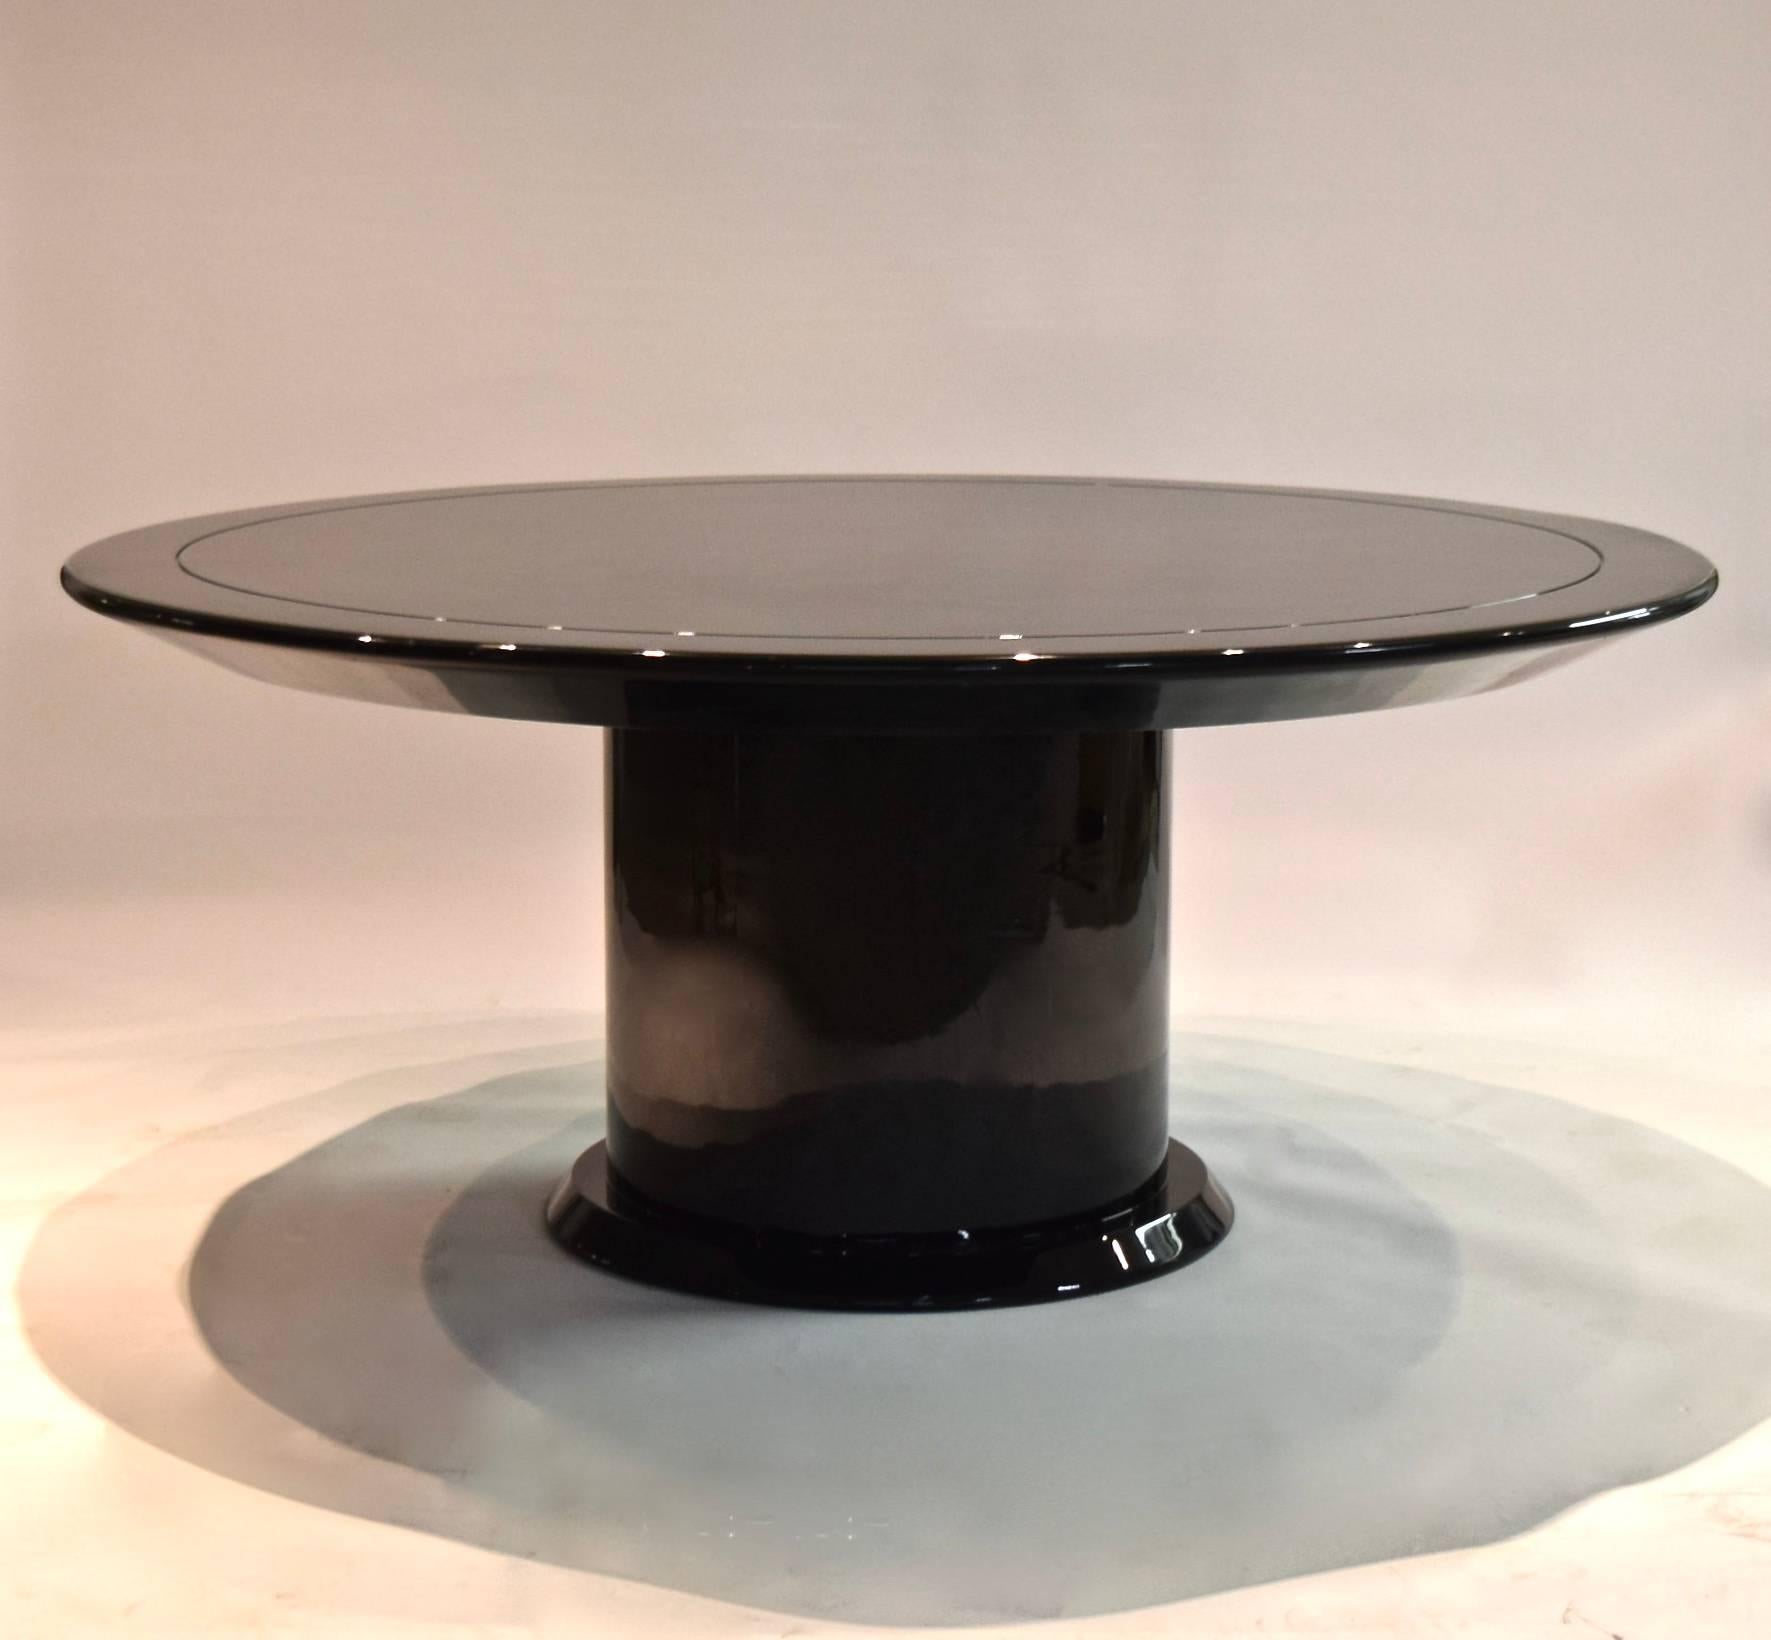 Large scale Table with a round top on a pedestal base finished in a high gloss black lacquer acquired directly from Takashima's flagship location in NYC.
The top has a channeled detail, a 3.75